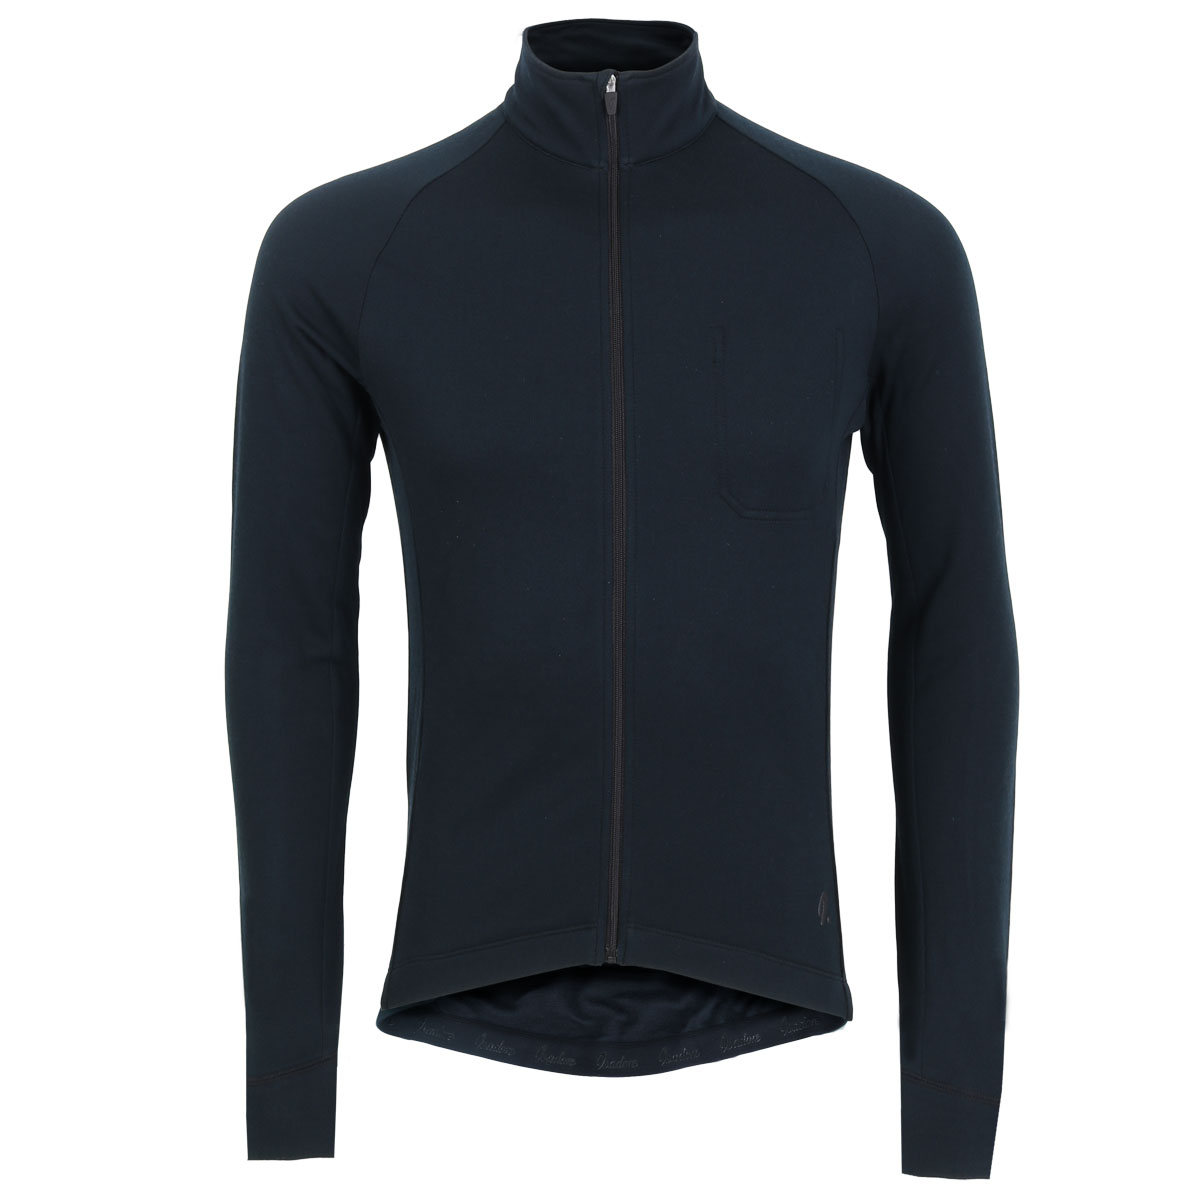 Image of Isadore Signature Thermal Long Sleeve Jersey Men - Anthracite